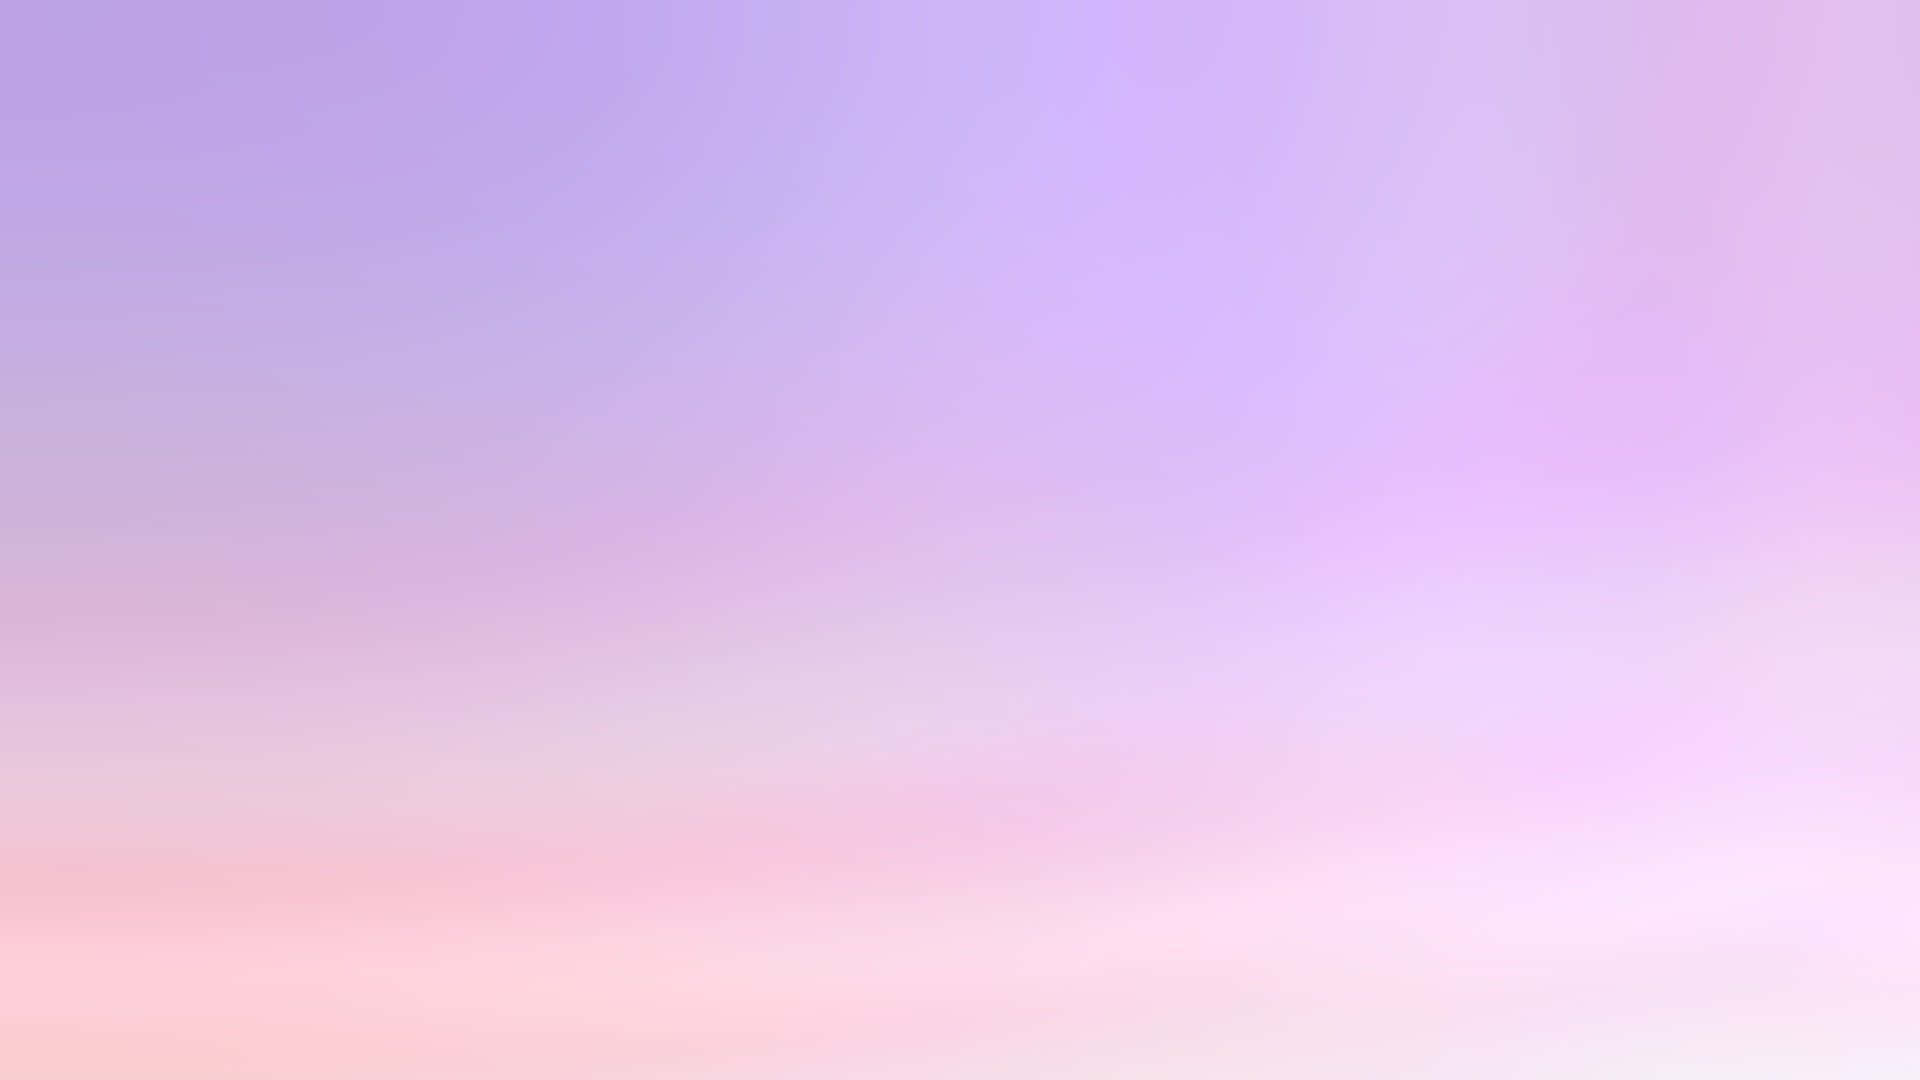 A Pink And Purple Background With A Cloud